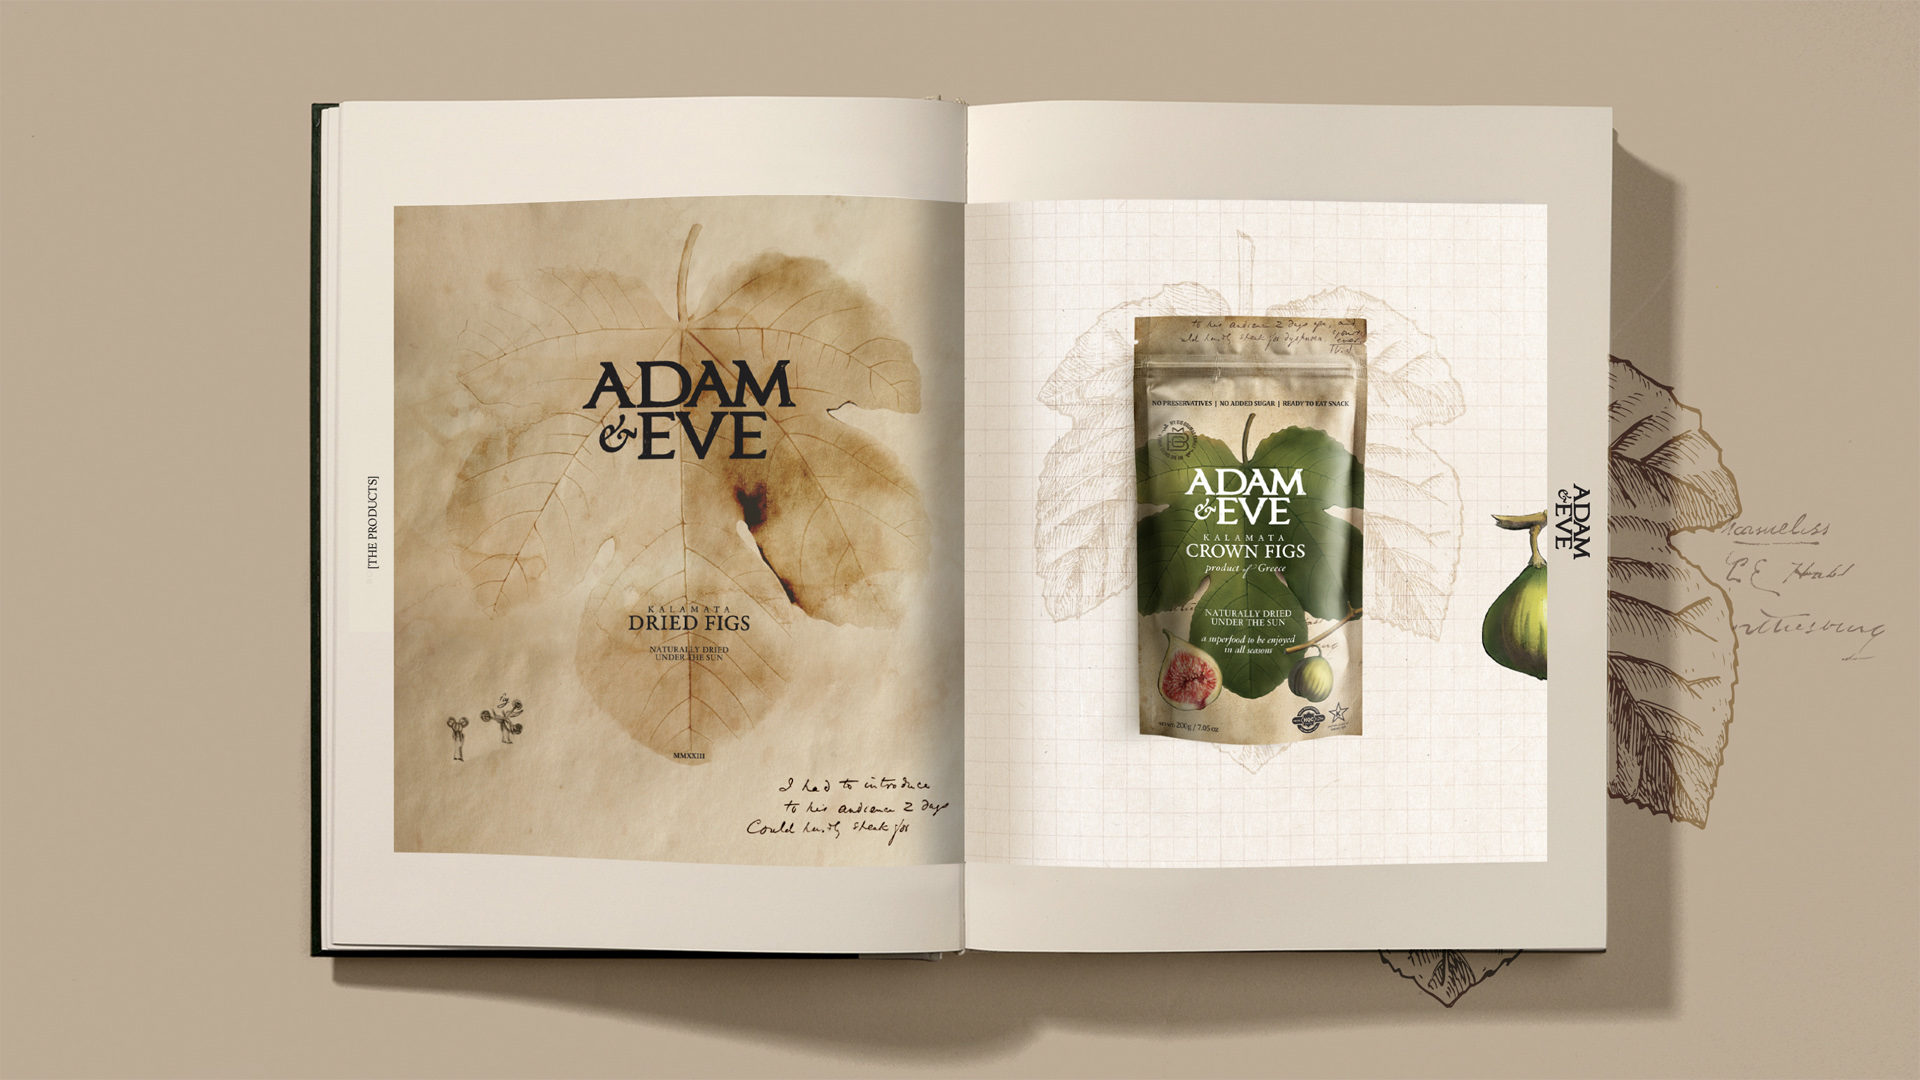 Botanical Elegance: Adam & Eve’s Sundried Figs Packaging Embraces Tradition and Global Appeal